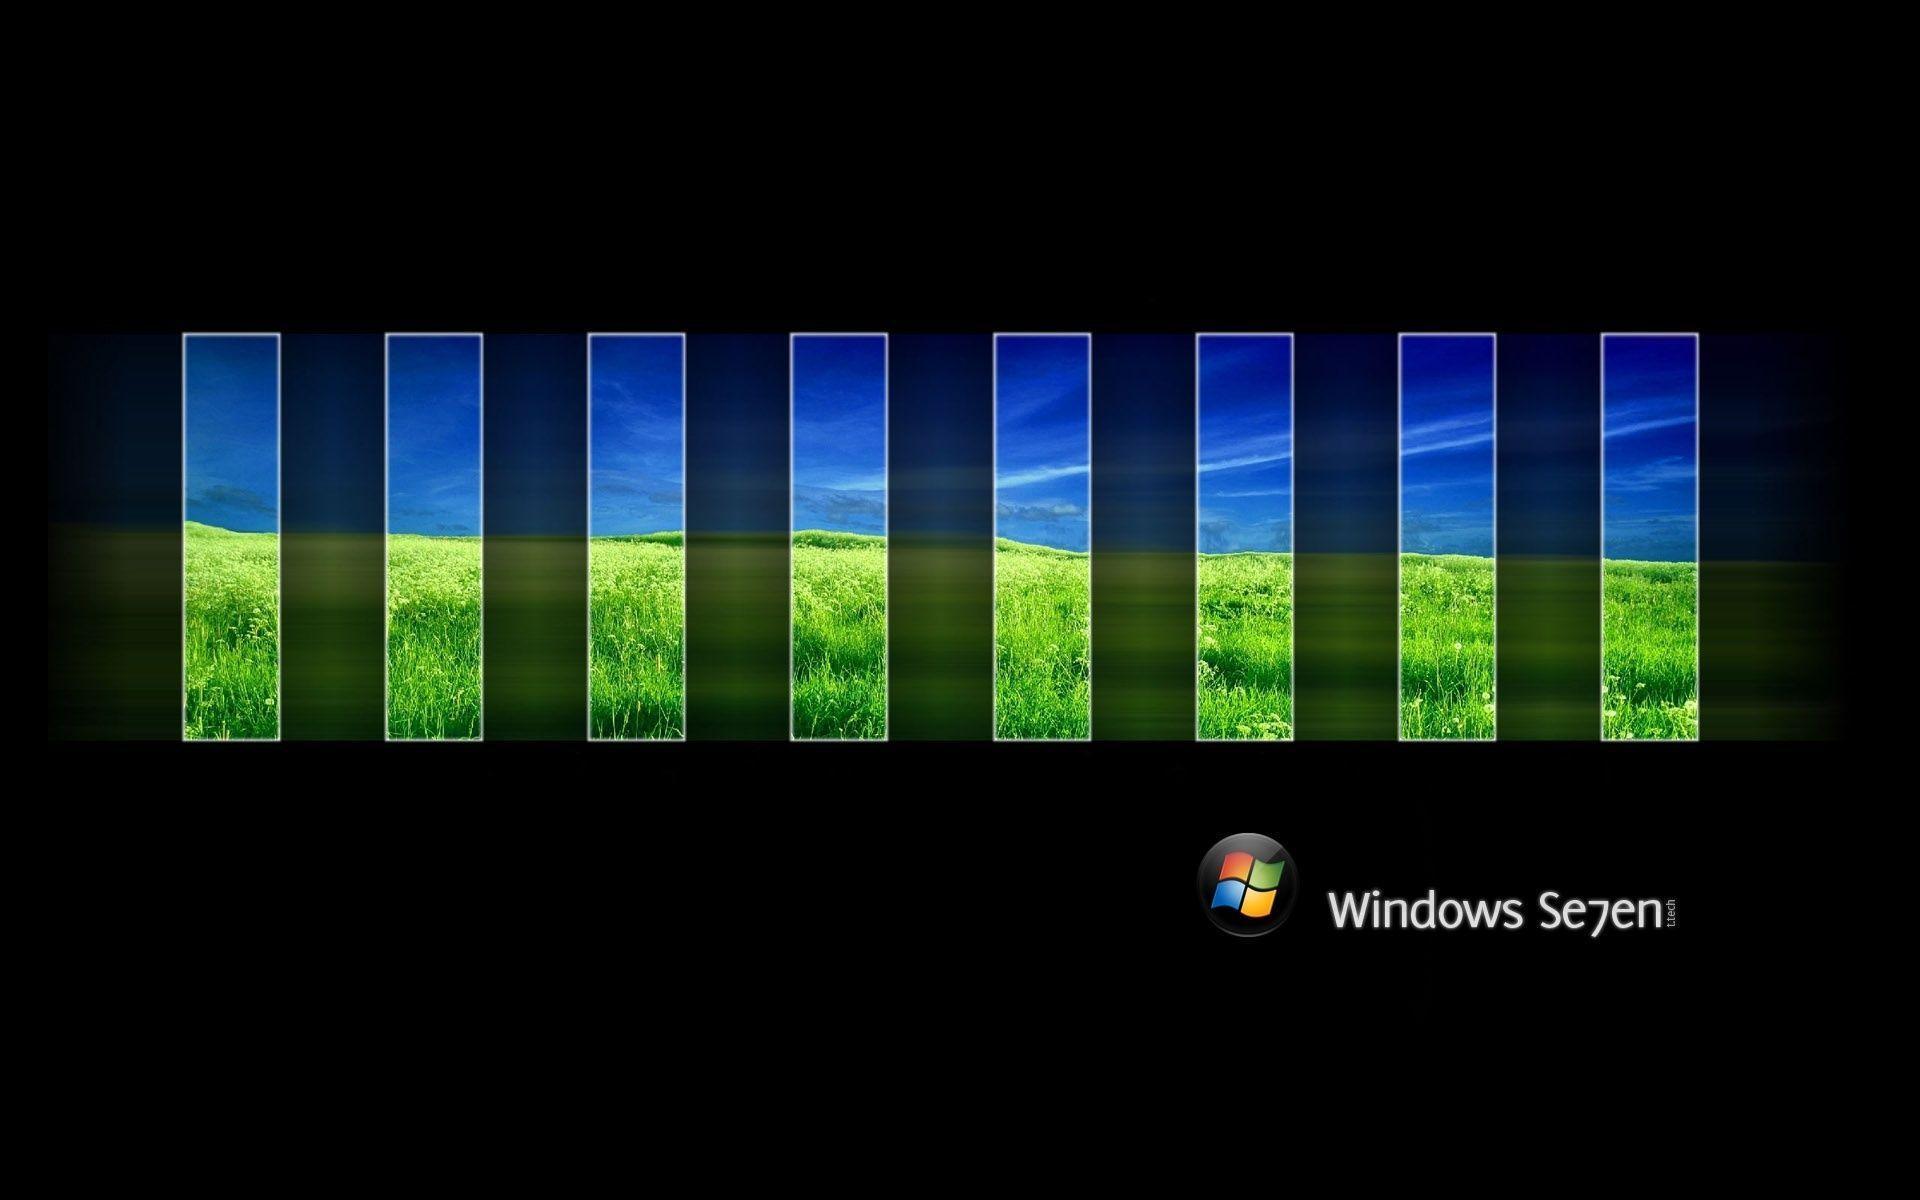 Windows 7 Hd Wallpaper Widescreen 161. Collection Of Picture